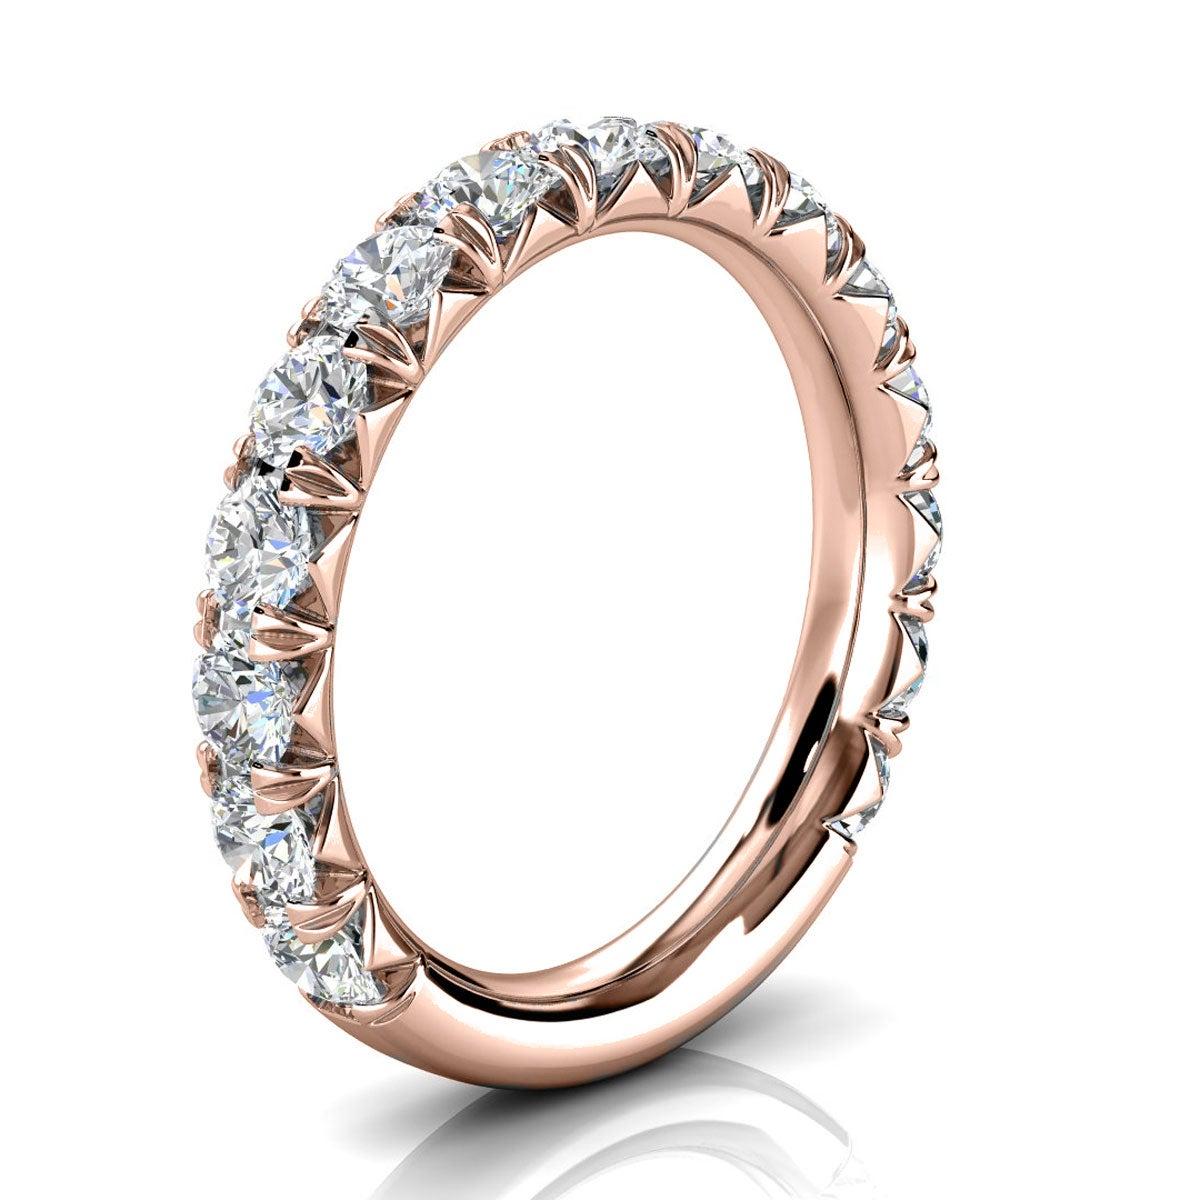 For Sale:  14k Rose Gold GIA French Pave Diamond Ring '1 1/2 Ct. tw' 2